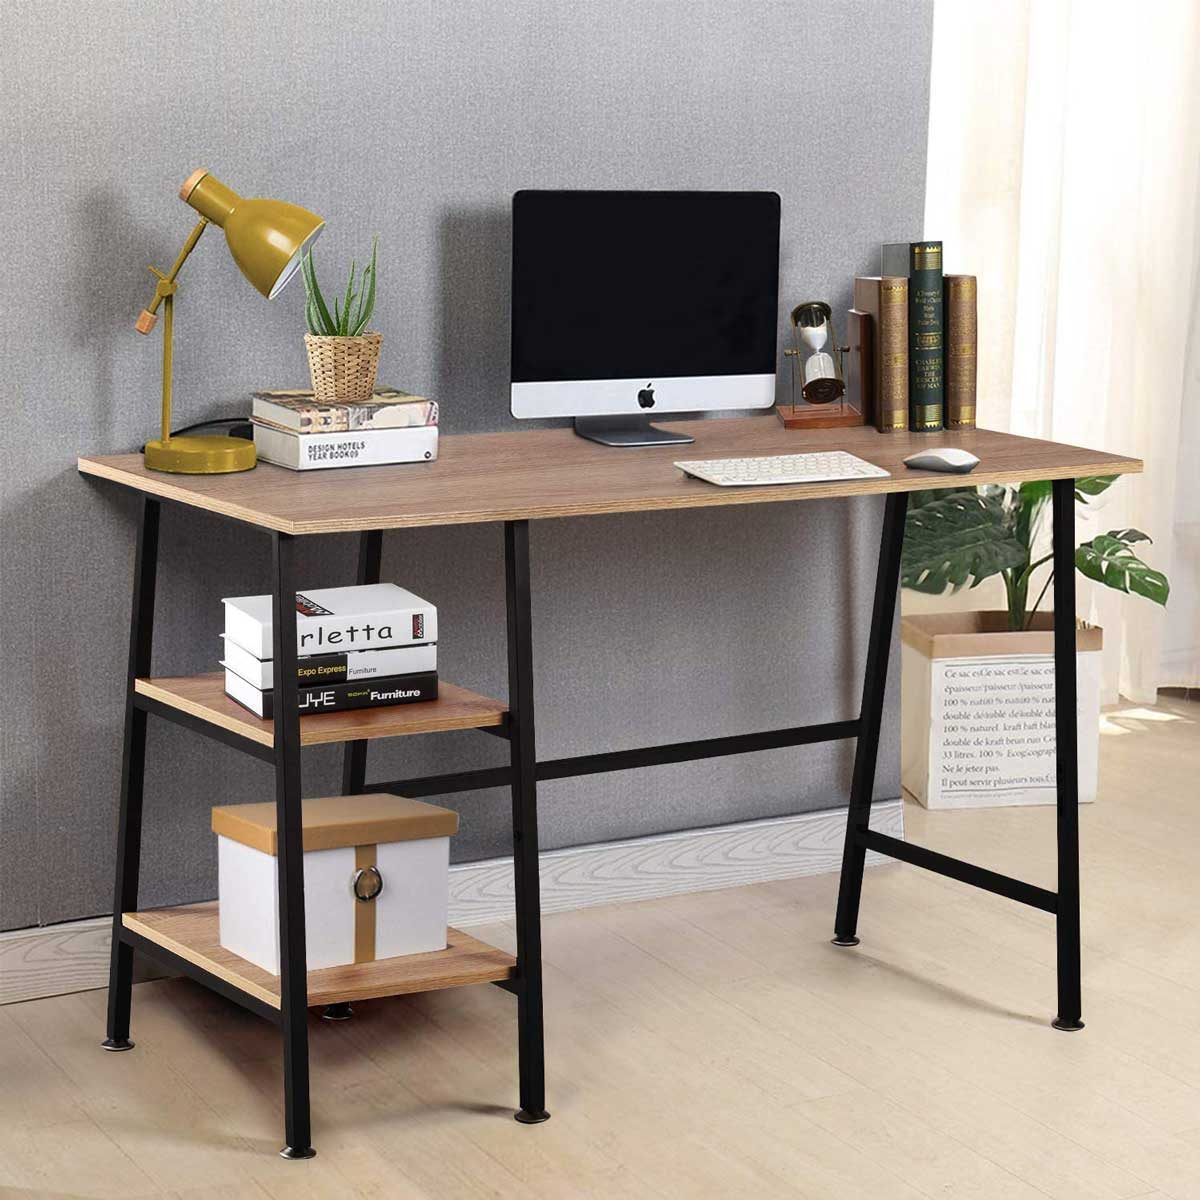 Small Space Desk 23 Best Desks For Small Spaces Small Modern Desks